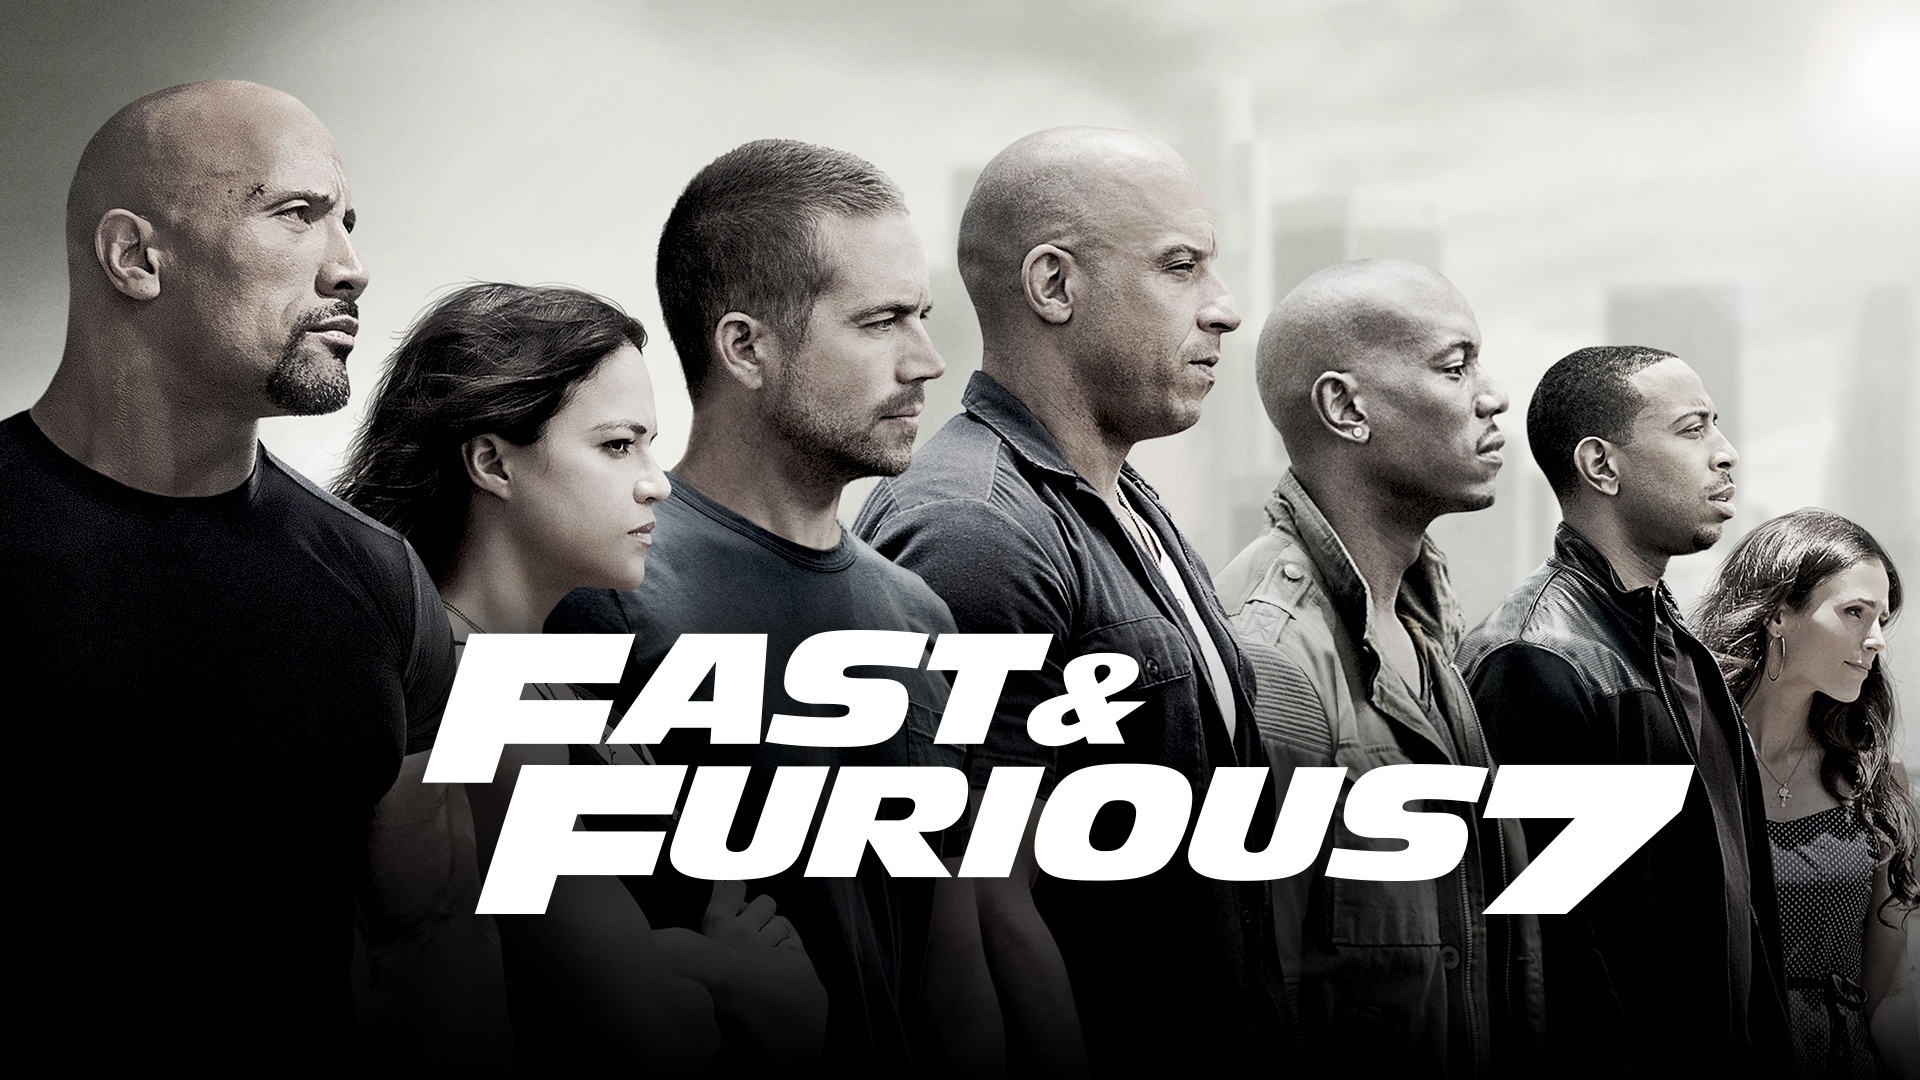 Furious 7, High-octane action, Fast and furious, Thrilling car chase, 1920x1080 Full HD Desktop